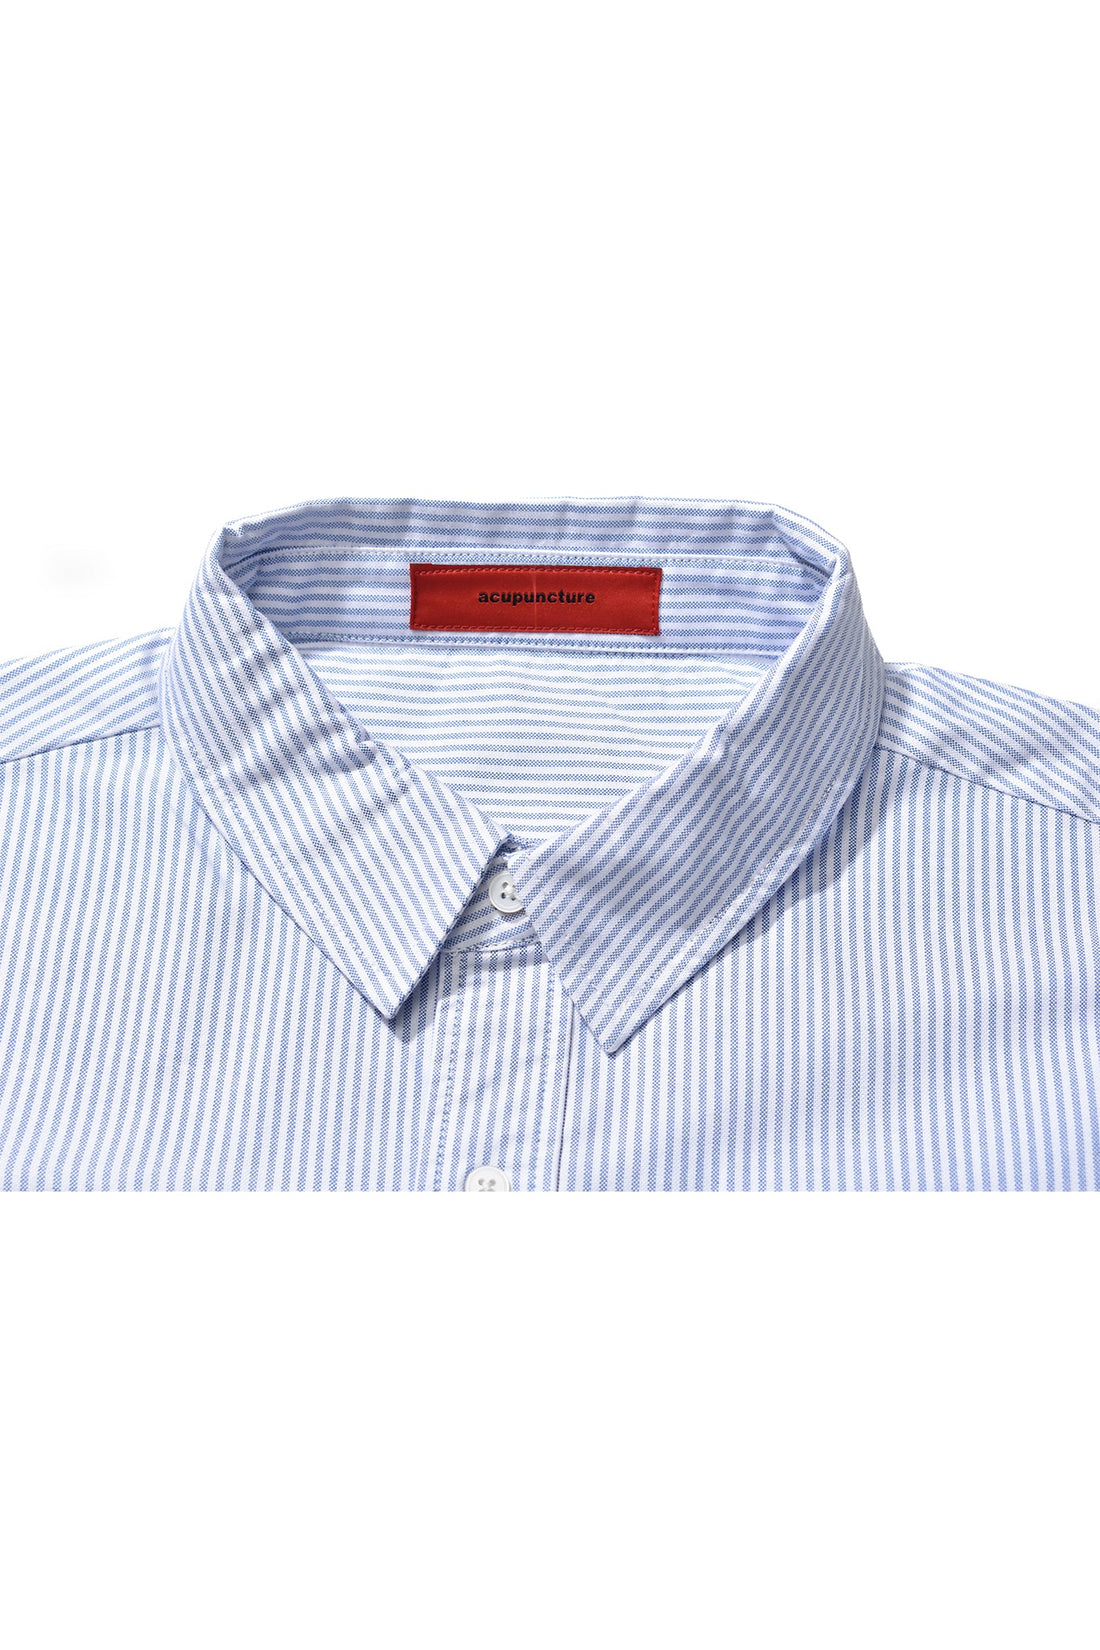 TEDDY STRIPED SHIRT LIGHT BLUE Acupuncture